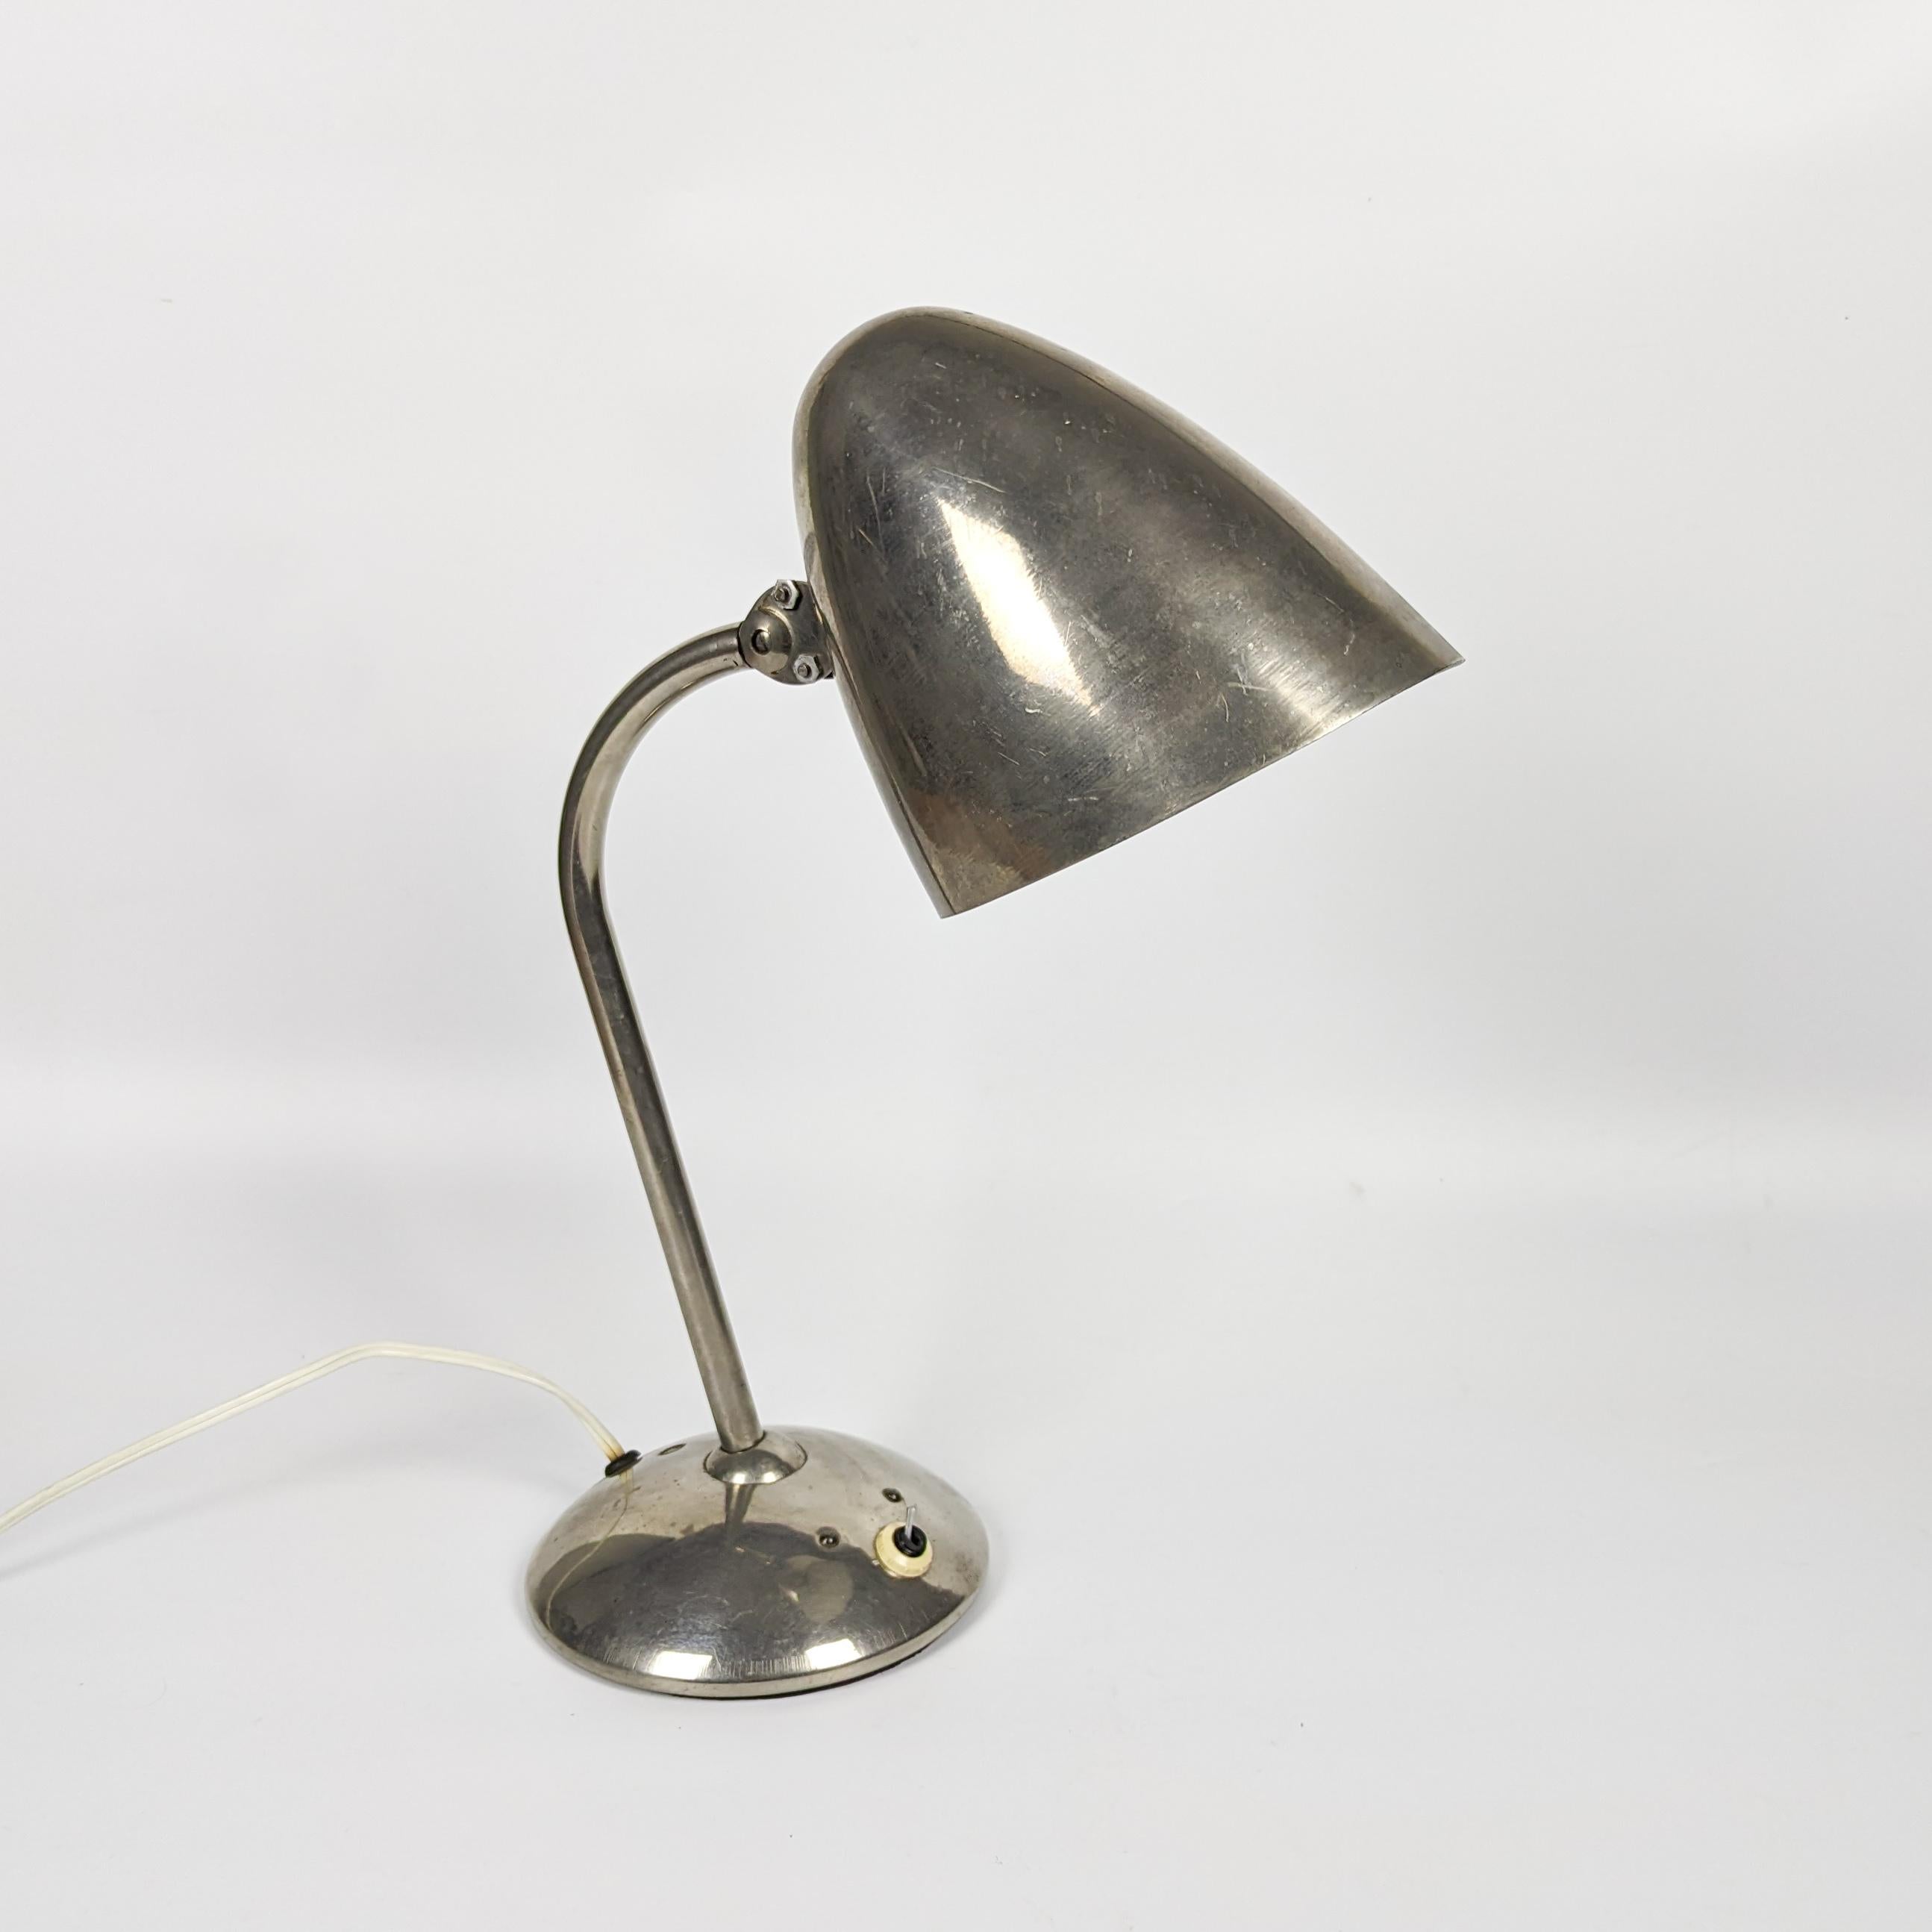 Iconic table lamp produced by the Franta Anýž Company and designed by Jaroslav Anýž, his son in early 1930s. This desk lamp is renowned for its distinctive joints, patented to allow the lampshade to pivot in any direction, with adjustable height.